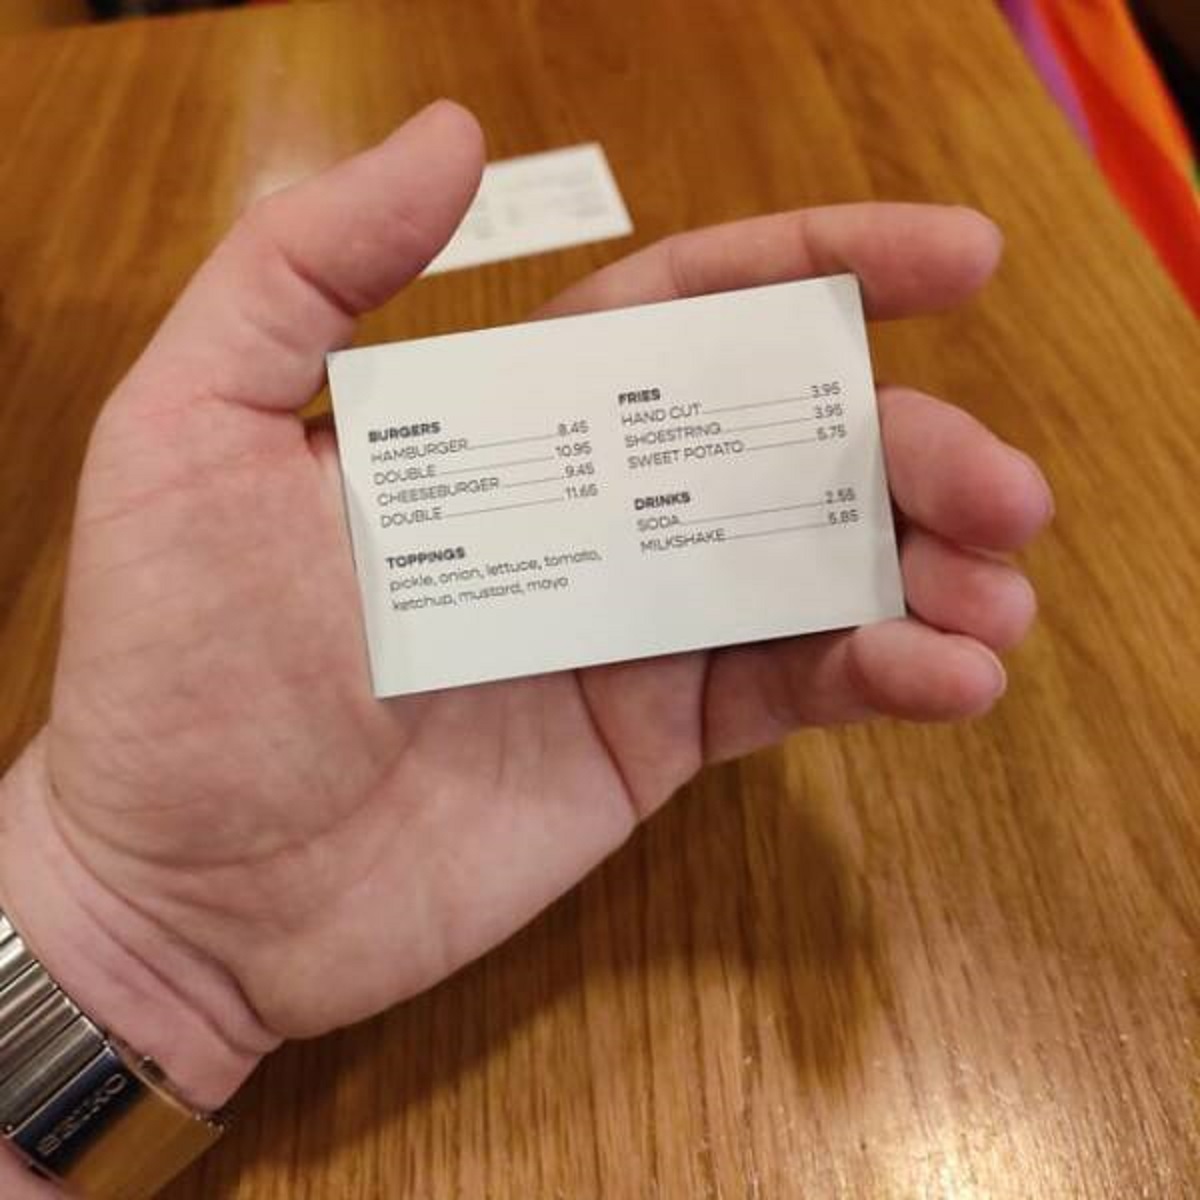 "This restaurant only prints their very short menus on business cards"